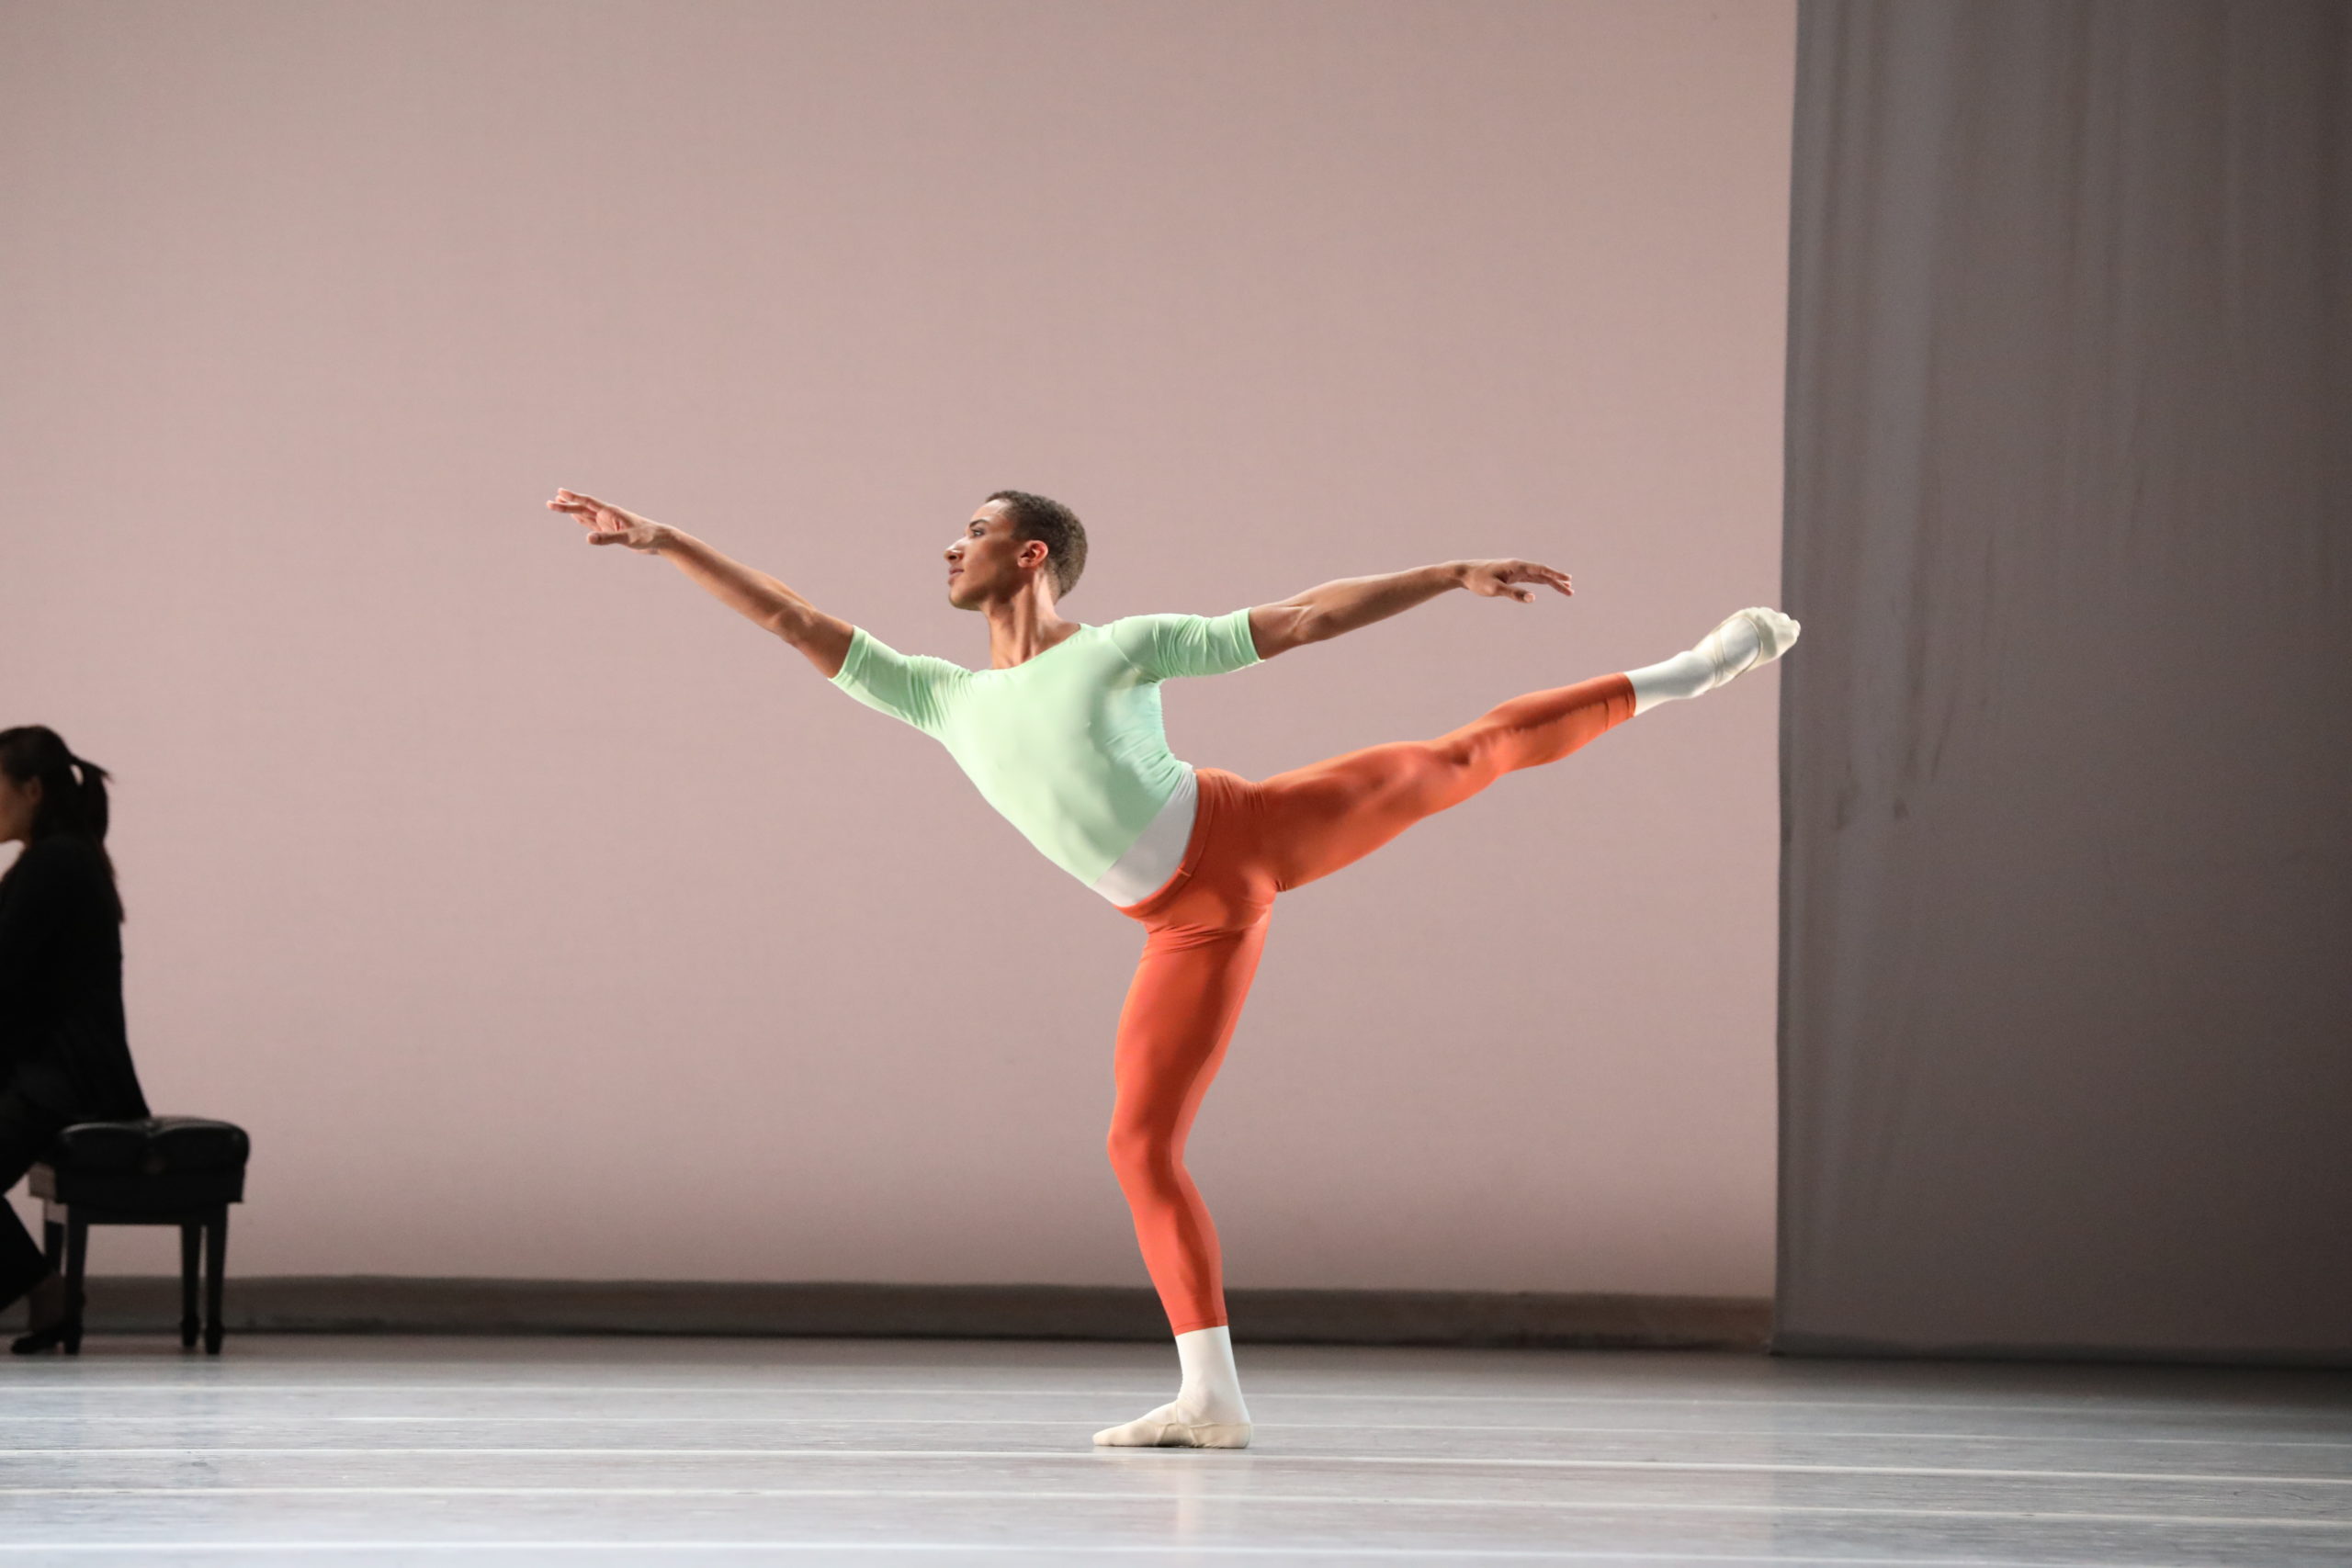 Image of dancer on stage wearing a pastel green top and orange tights